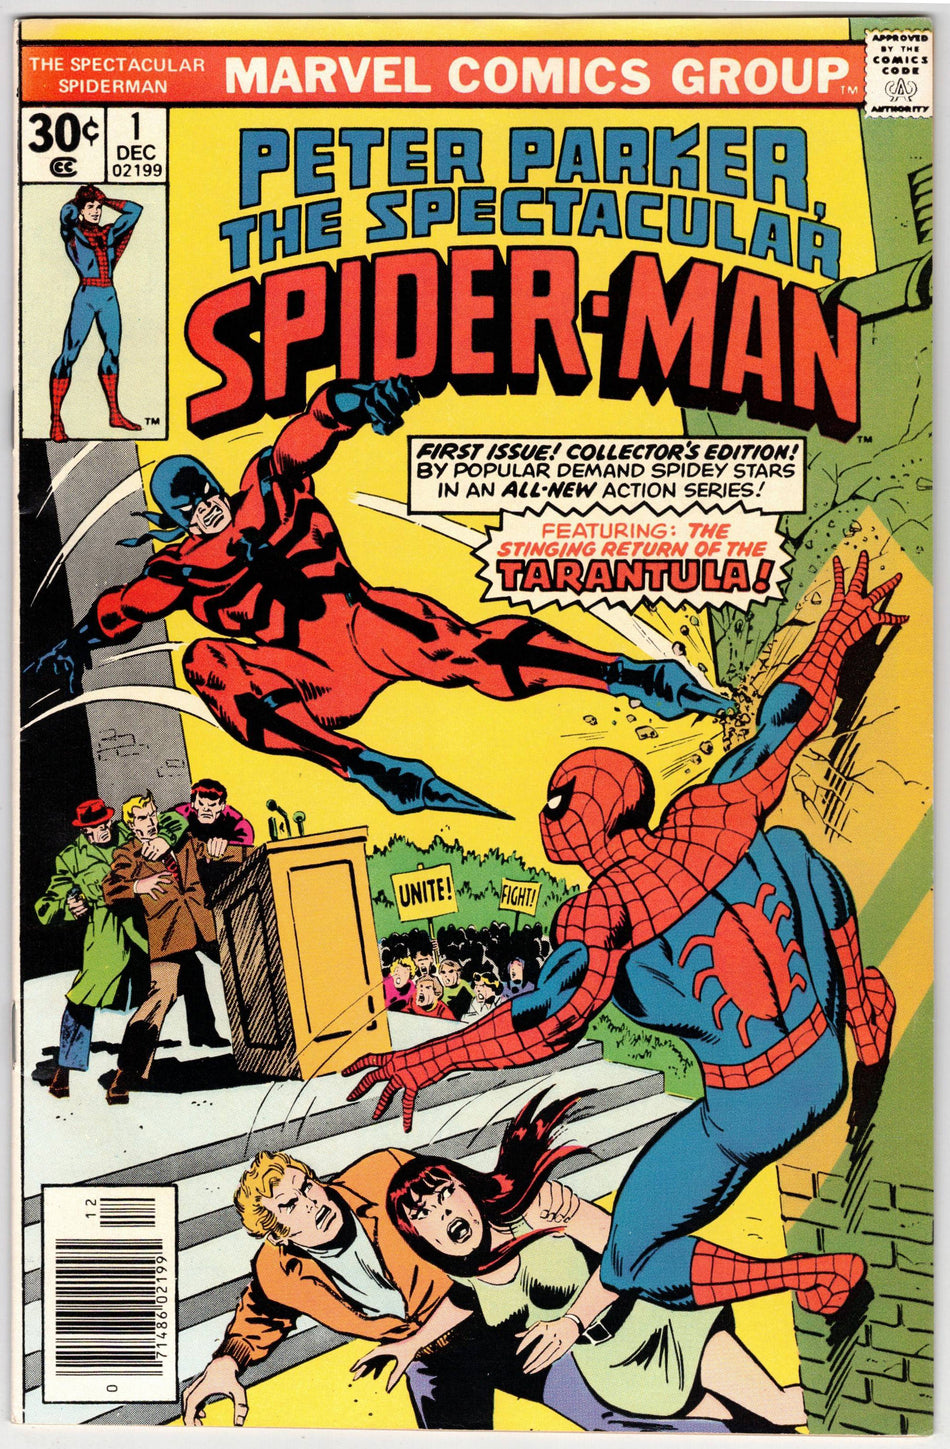 Photo of Spectacular Spider-Man, Vol. 1 (1976) Issue 1 - Very Fine + Comic sold by Stronghold Collectibles